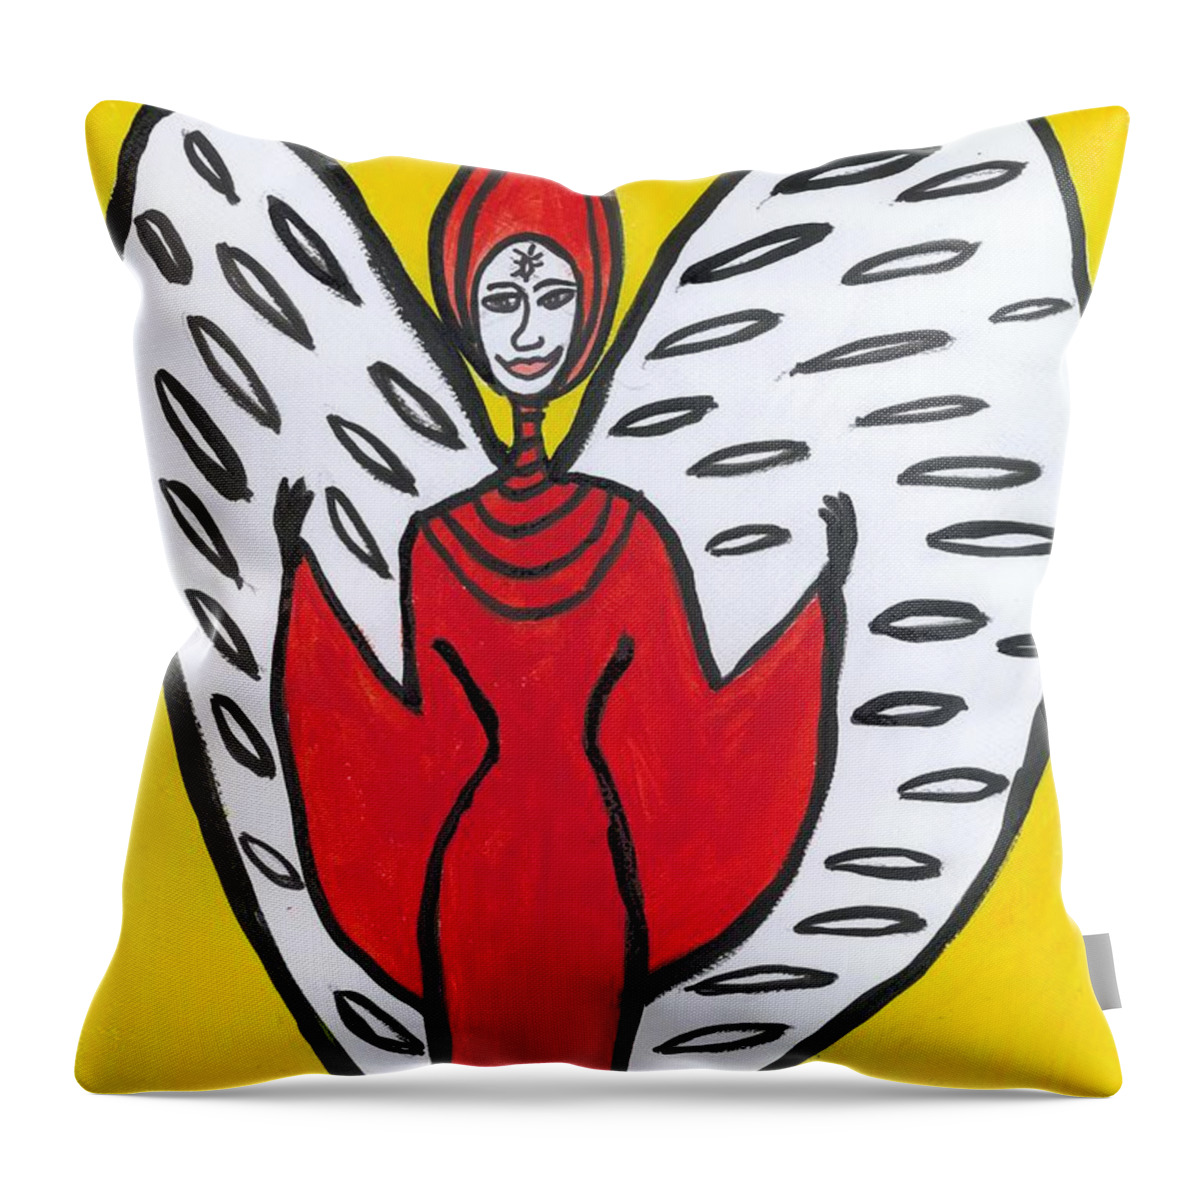 Angel Throw Pillow featuring the painting Divatrea by Victoria Mary Clarke